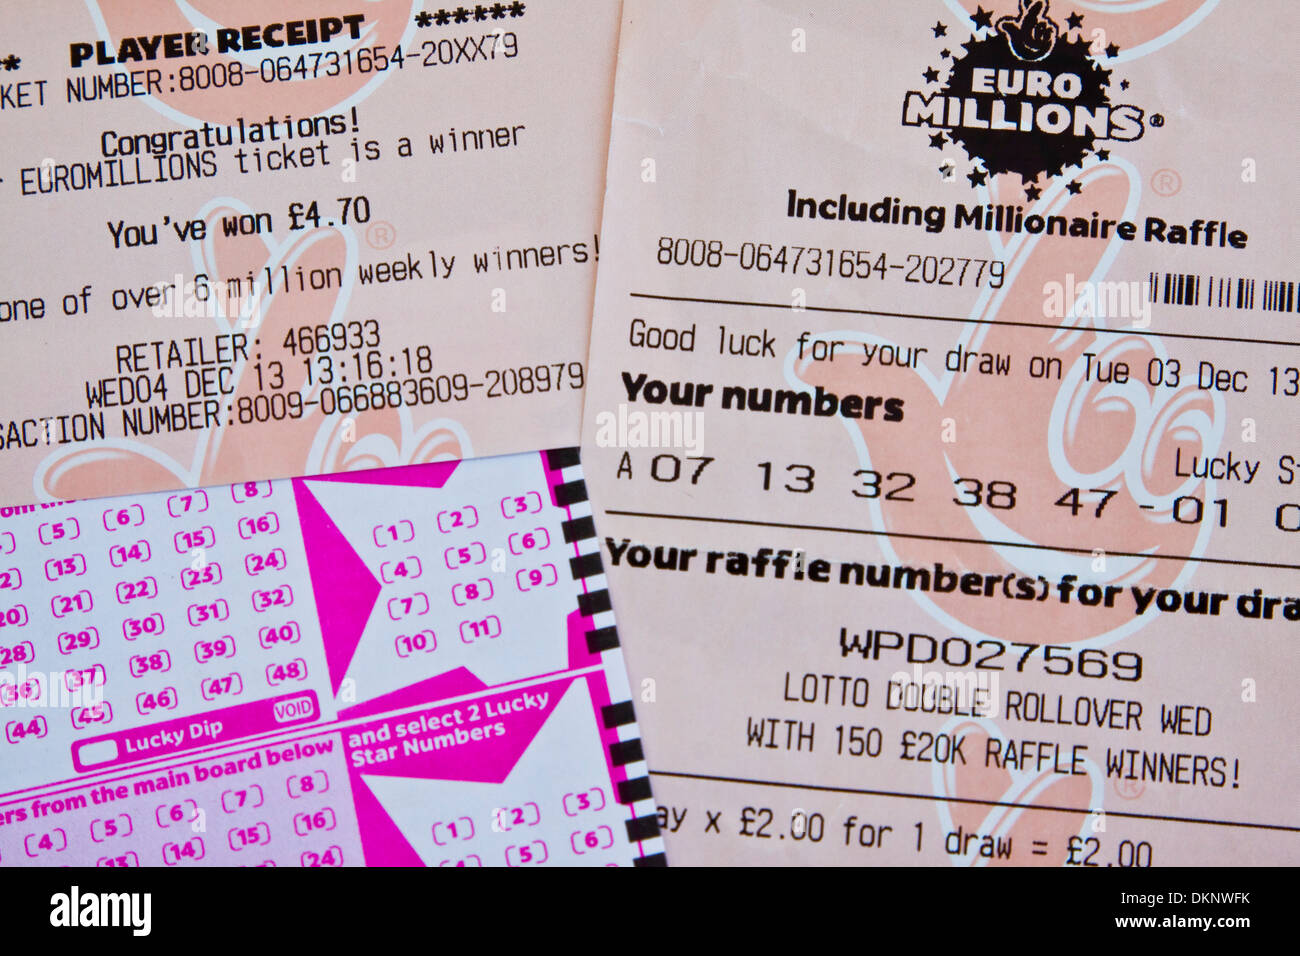 National lottery euro millions ticket, game slip and winning receipt